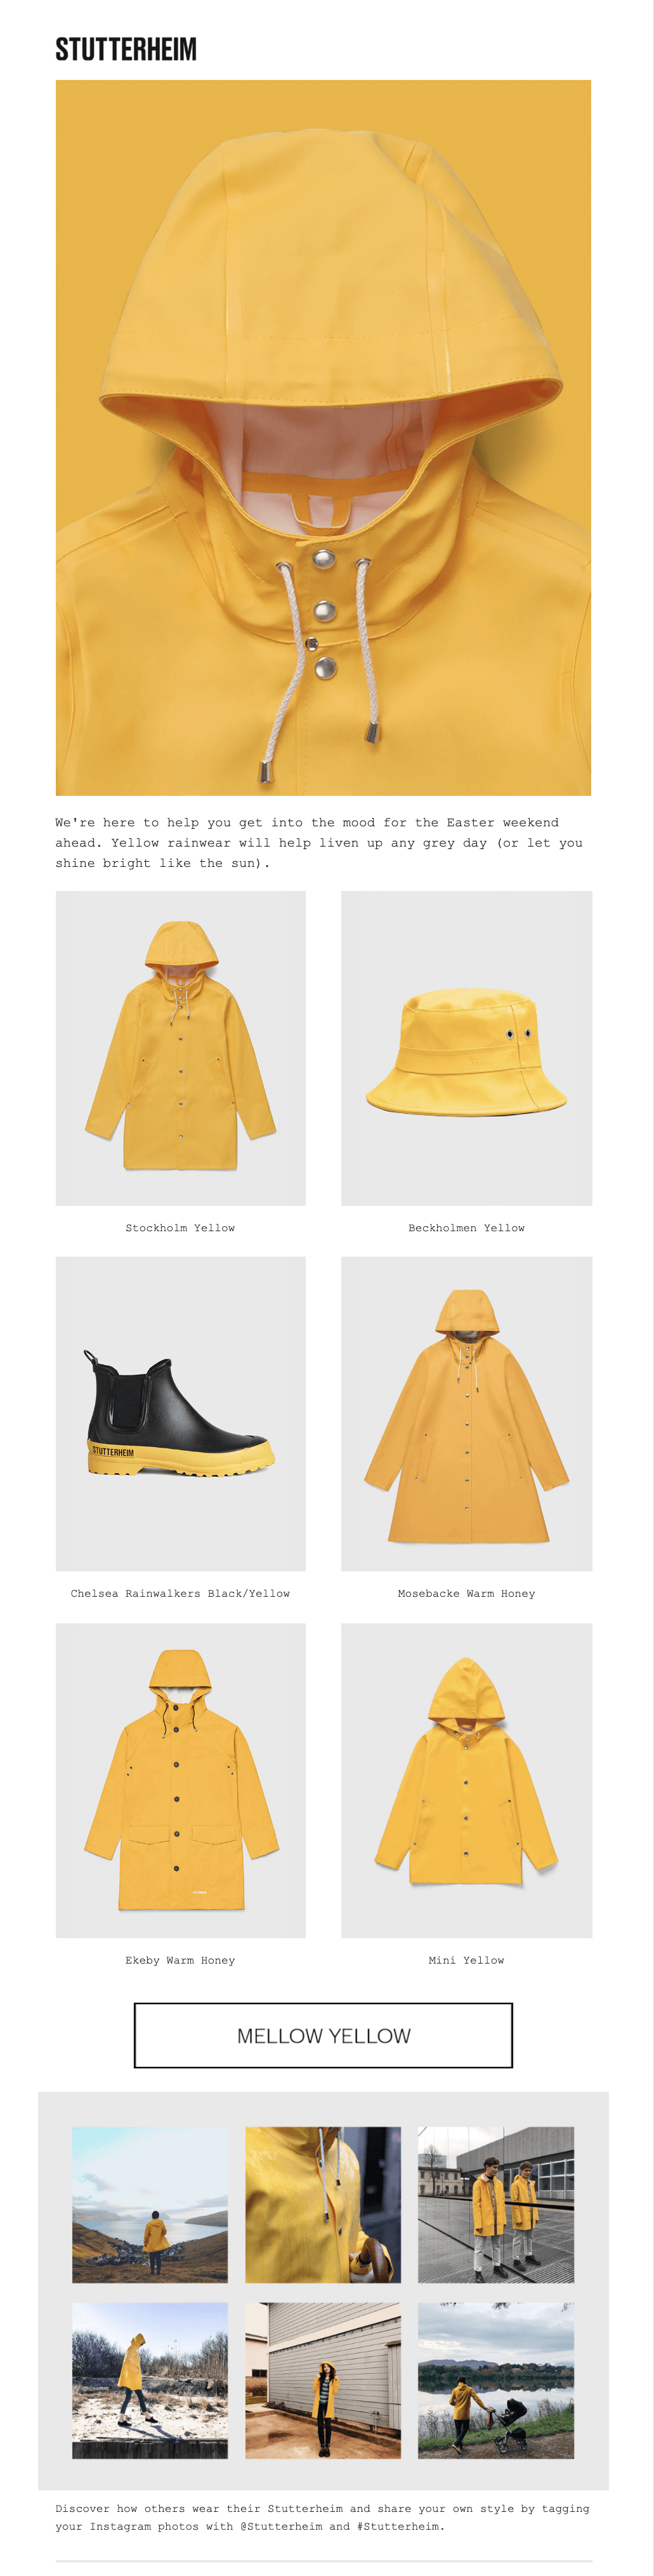 Easter Email Example by Stutterheim